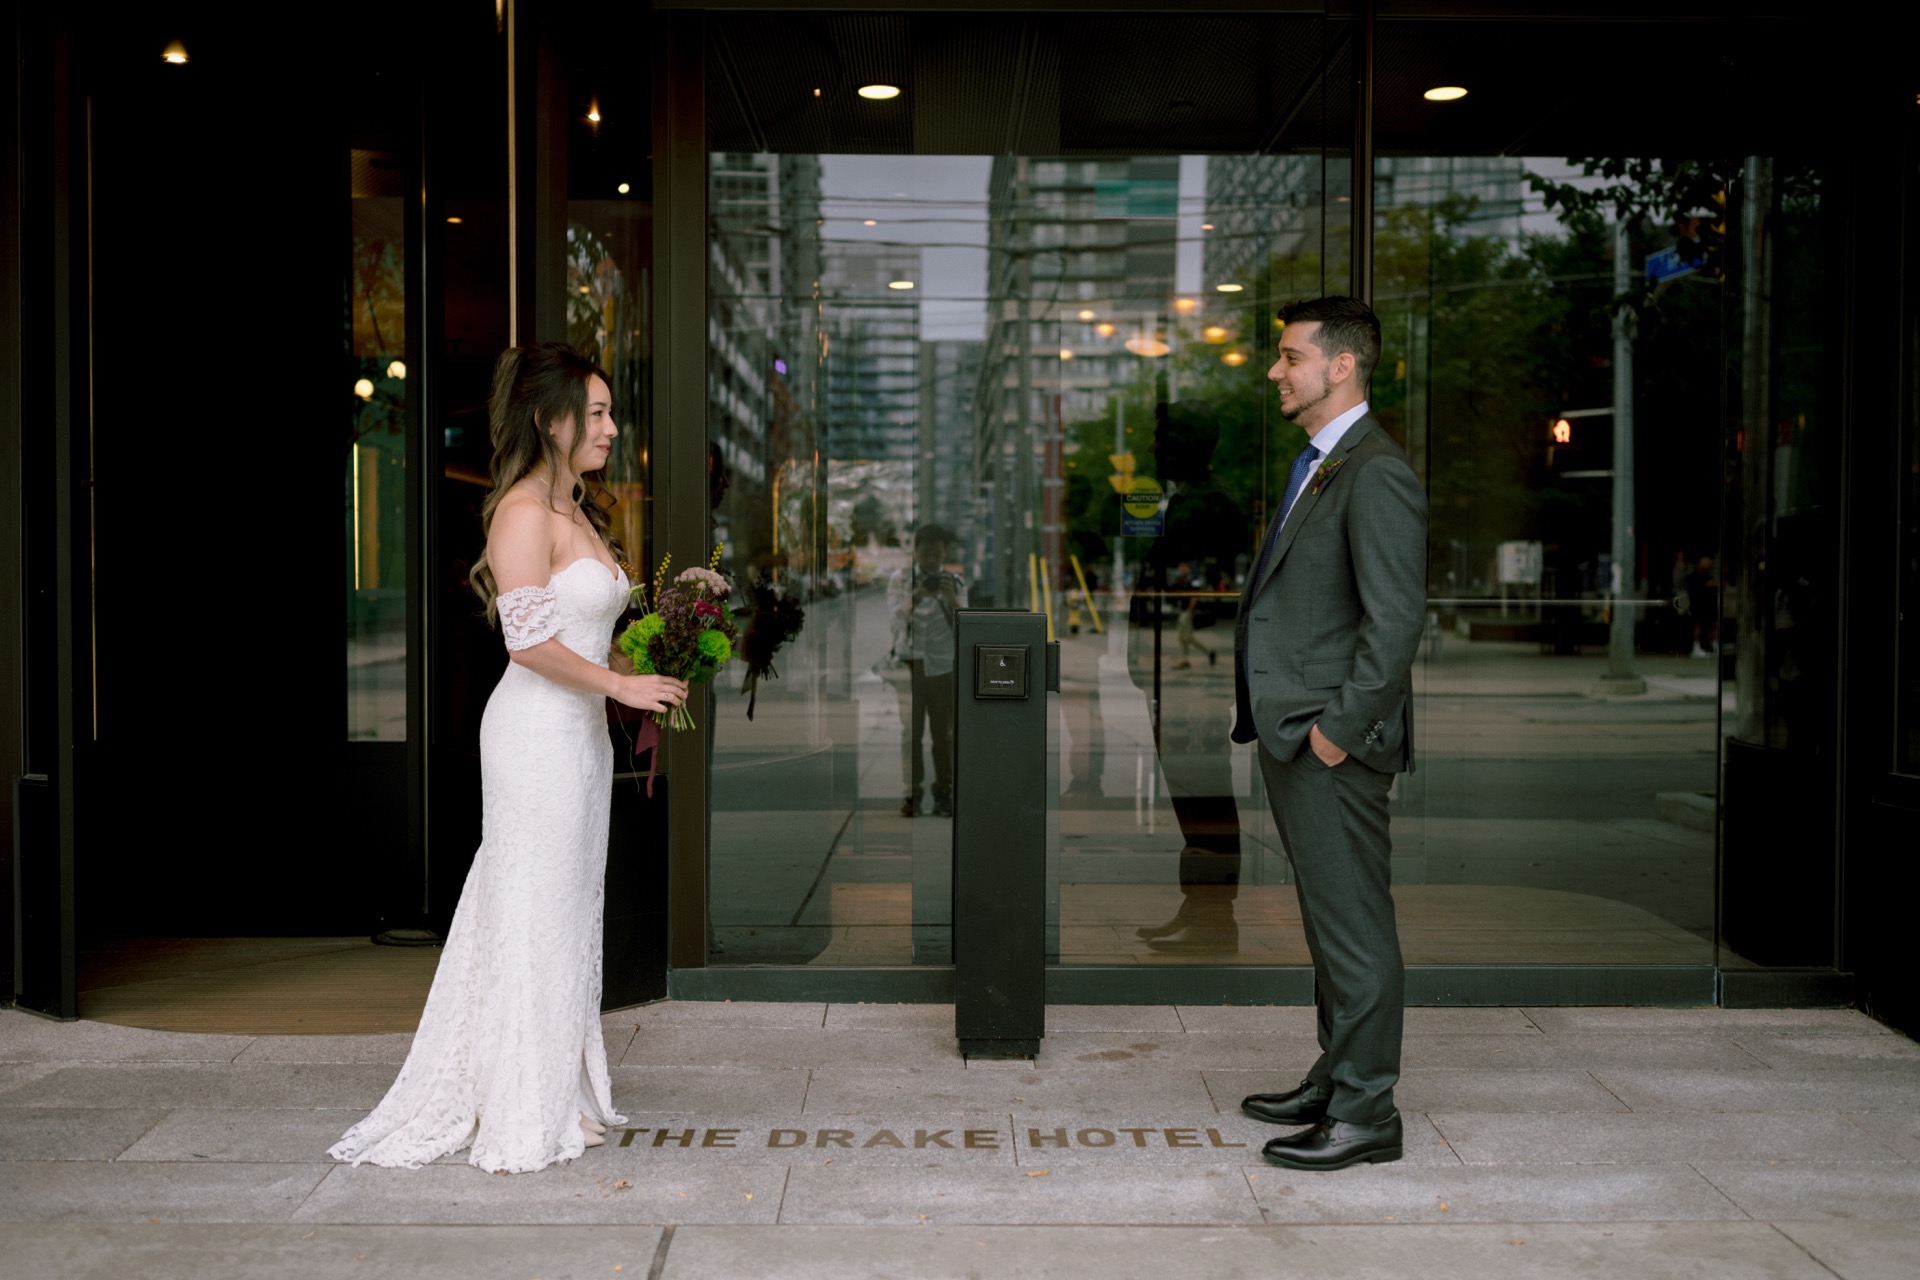 The couple laughing in front of The Drake Hotel for their wedding portrait. 